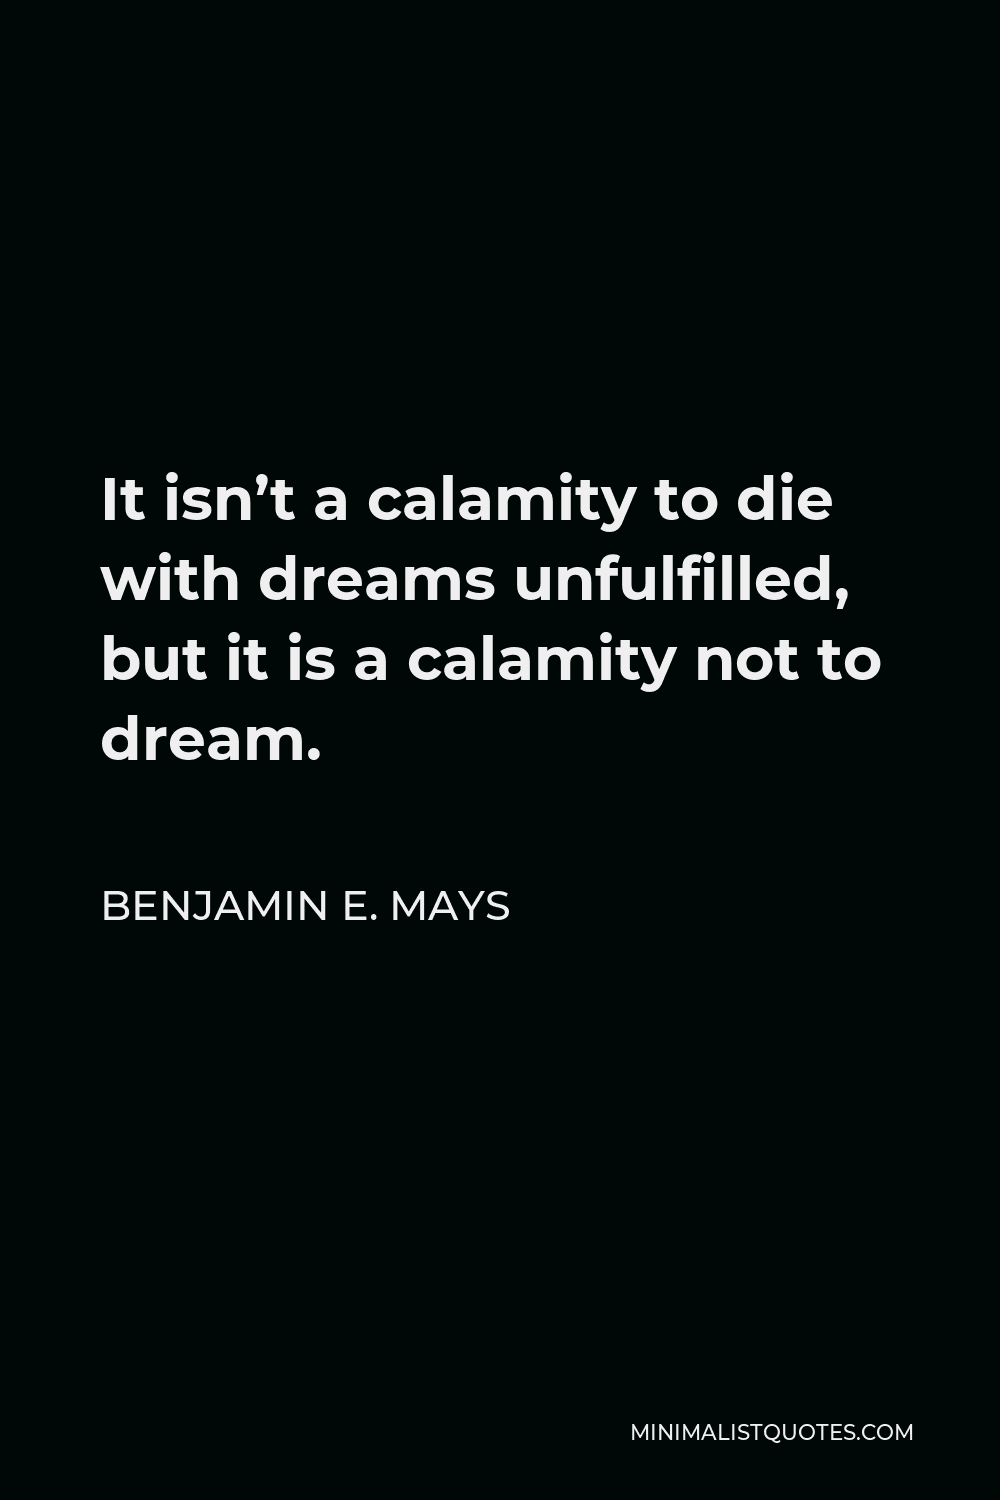 Benjamin E. Mays Quote - It isn’t a calamity to die with dreams unfulfilled, but it is a calamity not to dream.